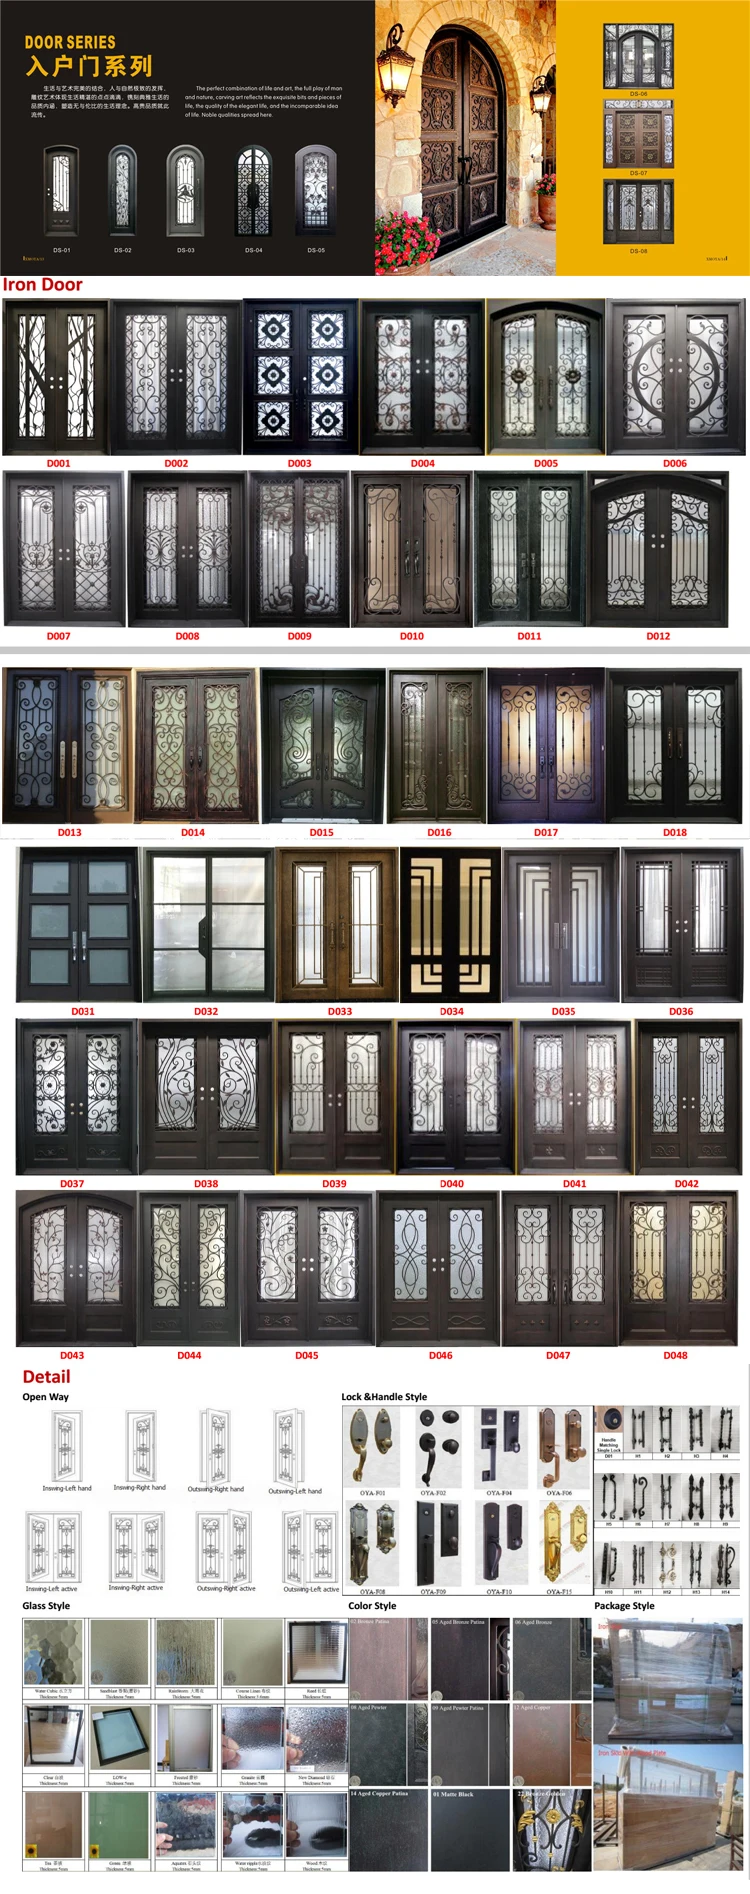 Outdoor Wrought Iron French Patio Glass Door Lowes Wrought Iron Front Double Main Entry Storm Door Price